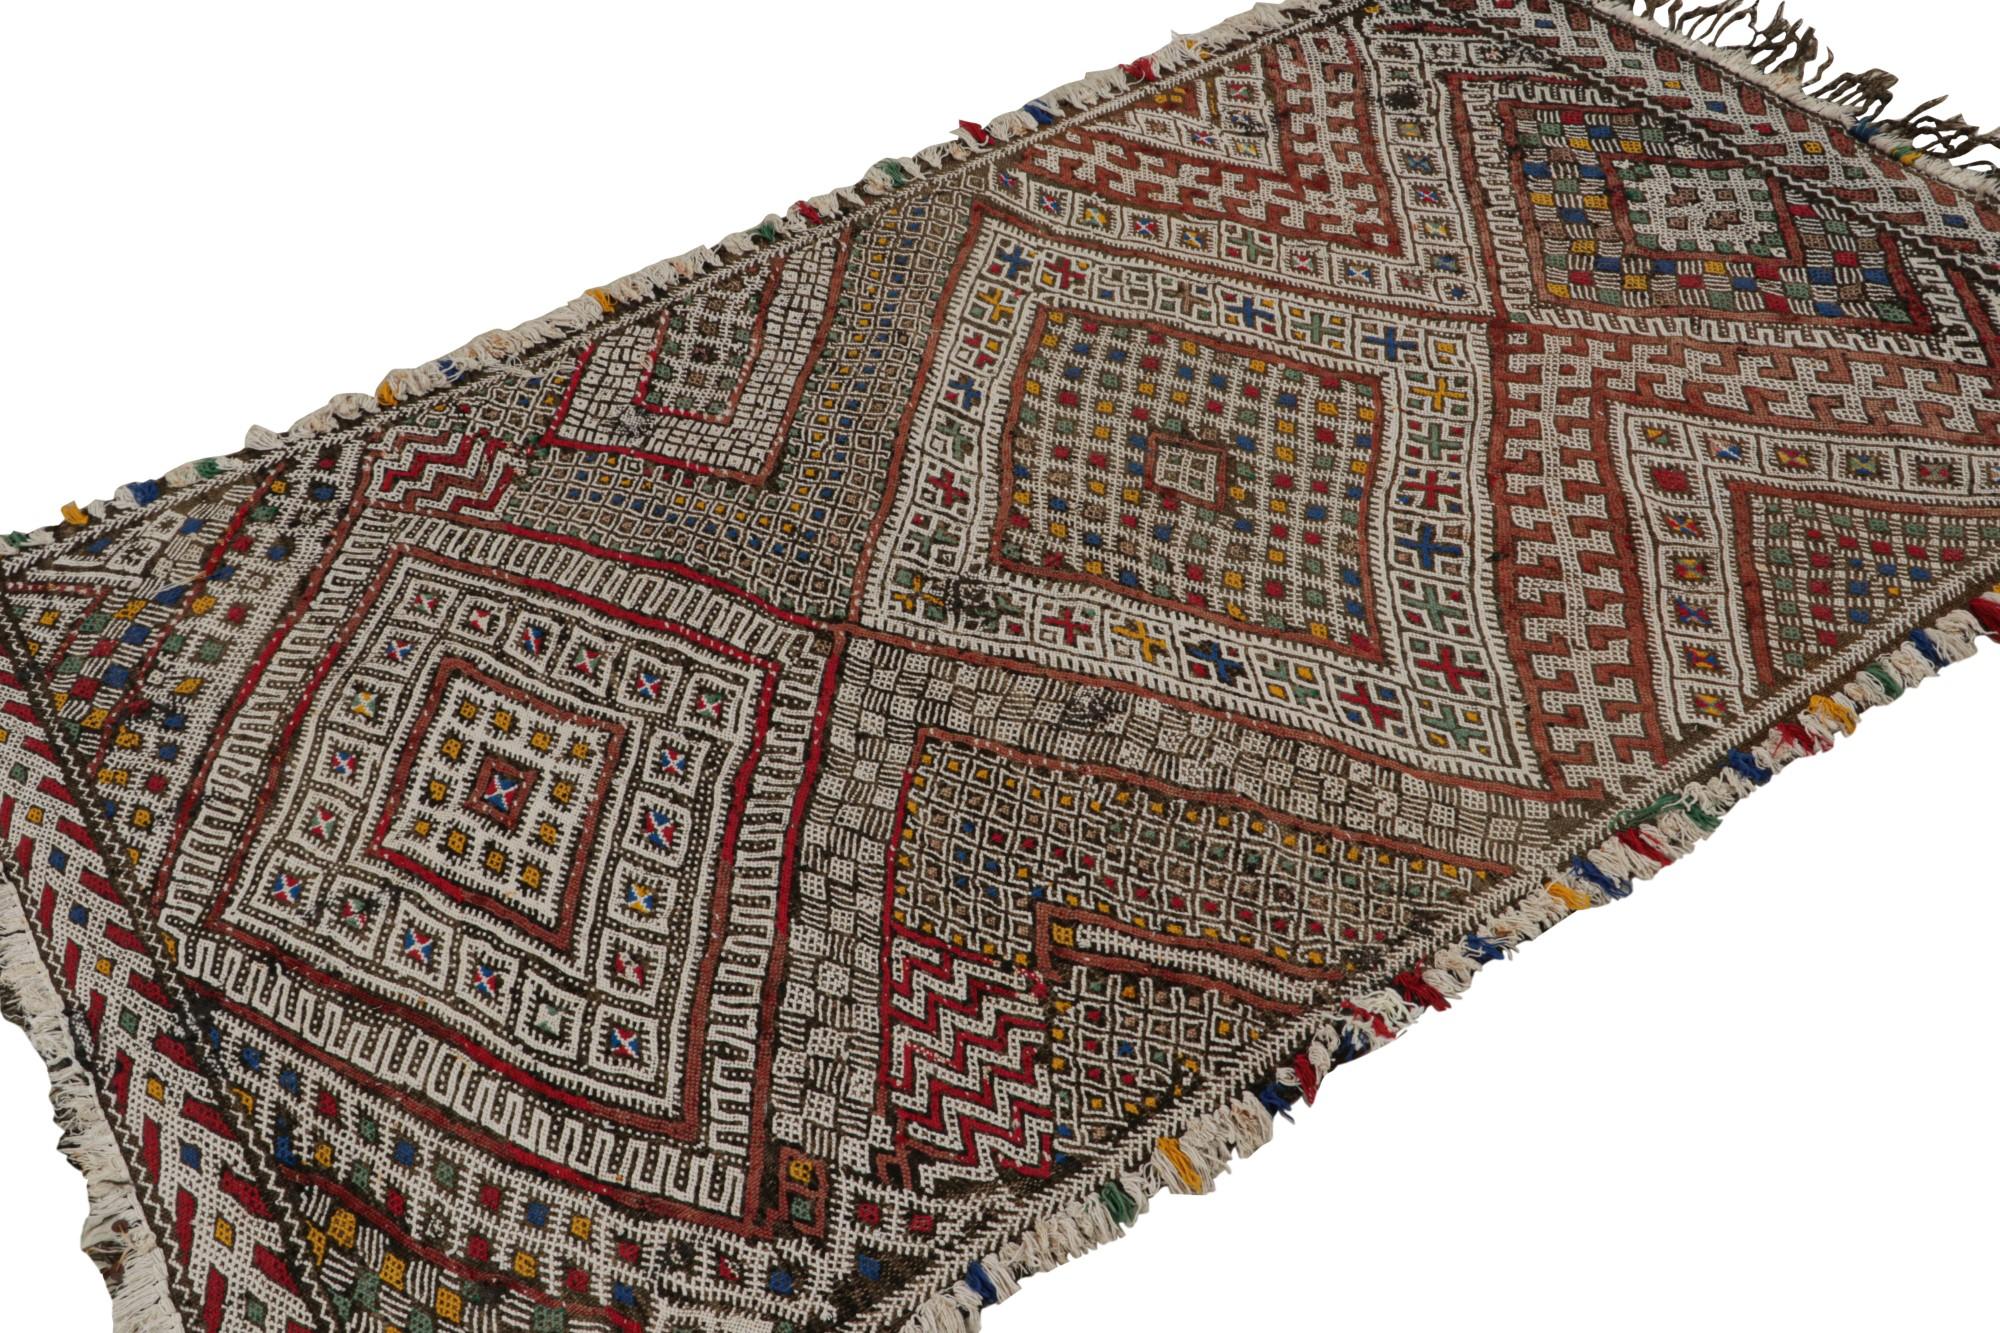 Hand-knotted in wool, this 4x6 vintage Zayane Moroccan kilim rug is believed to have originated from the same tribe in the middle Atlas mountain range in Morocco.  

On the Design: 

Admirers of the craft will appreciate this vintage rug as a